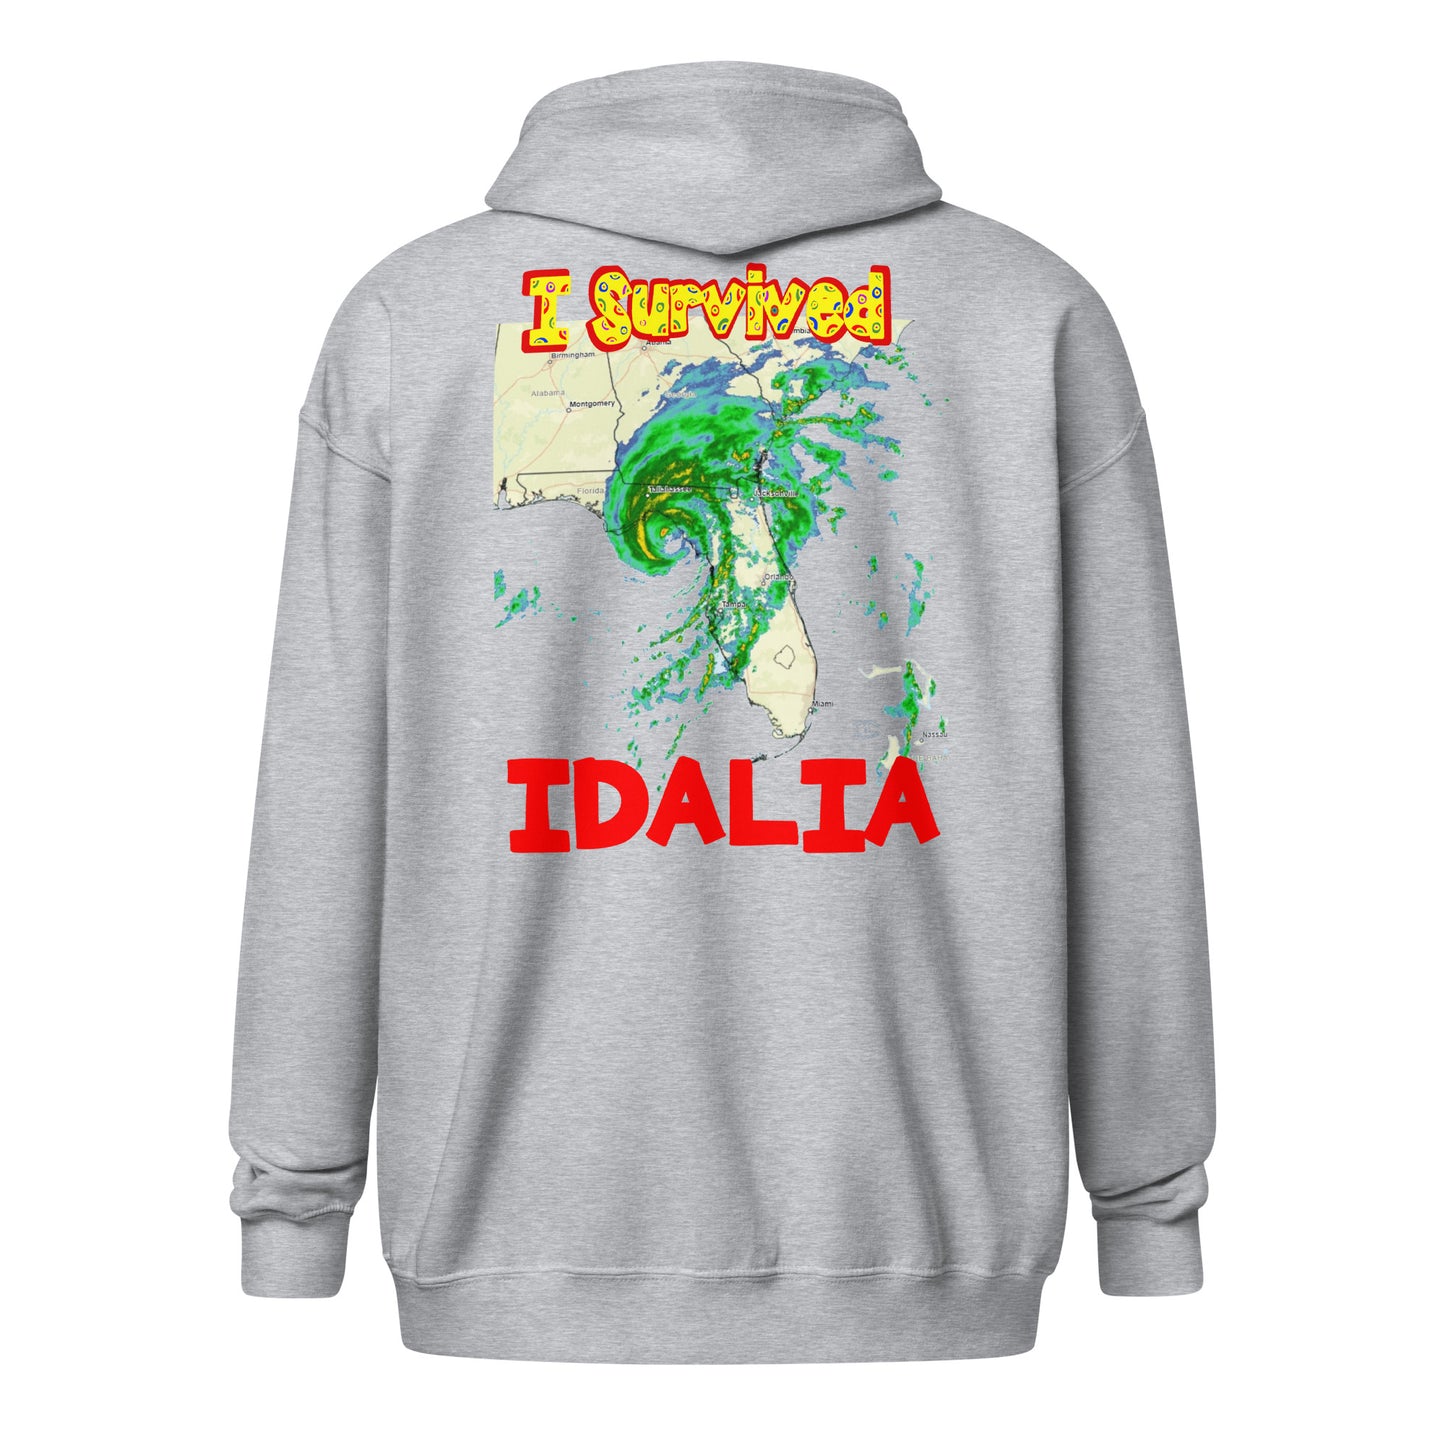 A cut out picture of a hoodie with back print design of I SURVIVED Hurricane IDALIA Unisex Heavy Blend Zip Hoodie in sport grey